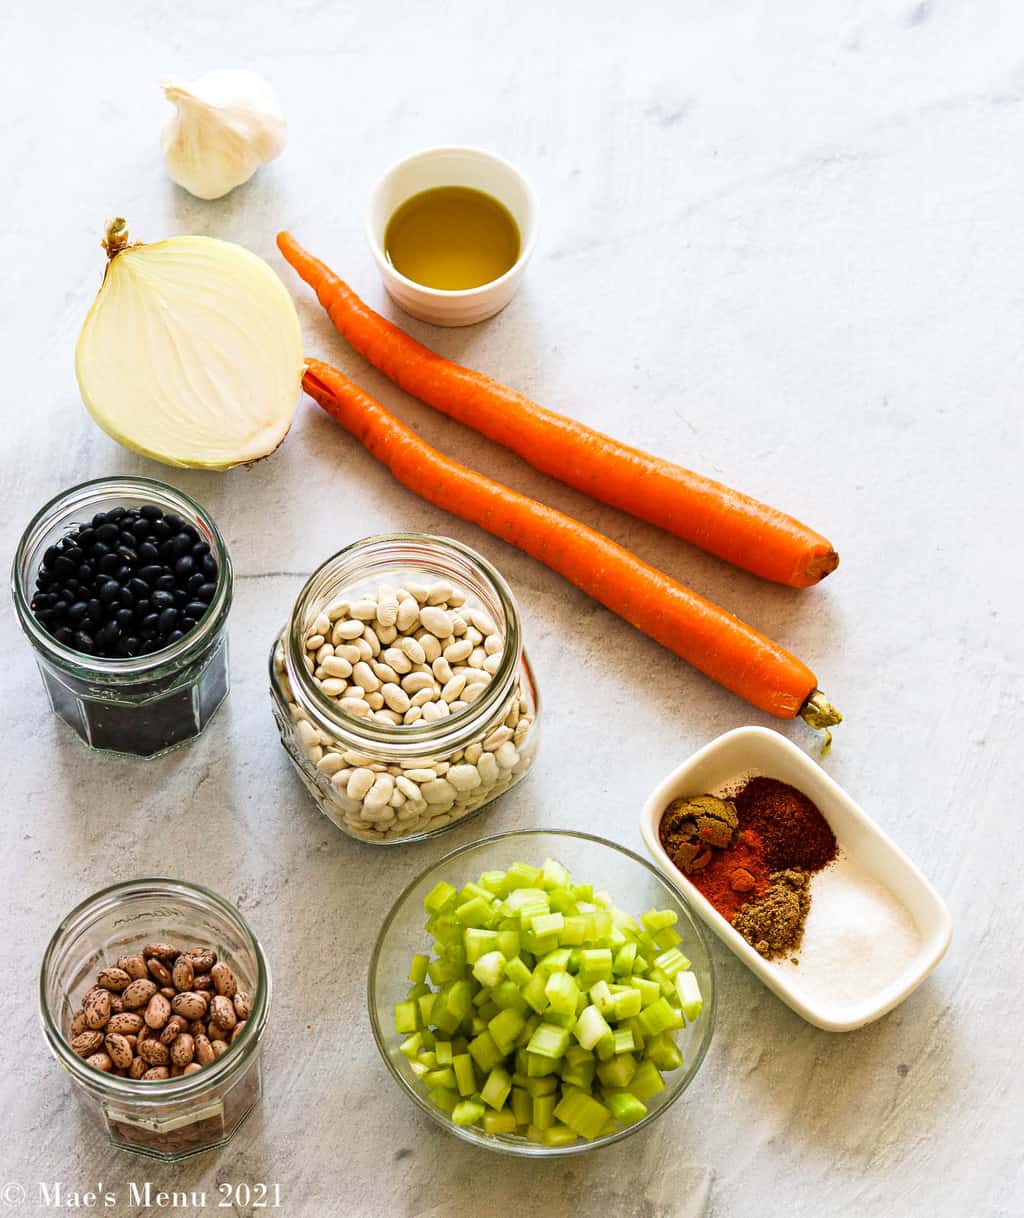 All of the ingredients for instant pot bean soup: dried beans, celery, onions, garlic, olive oil, seasonings, and carrots